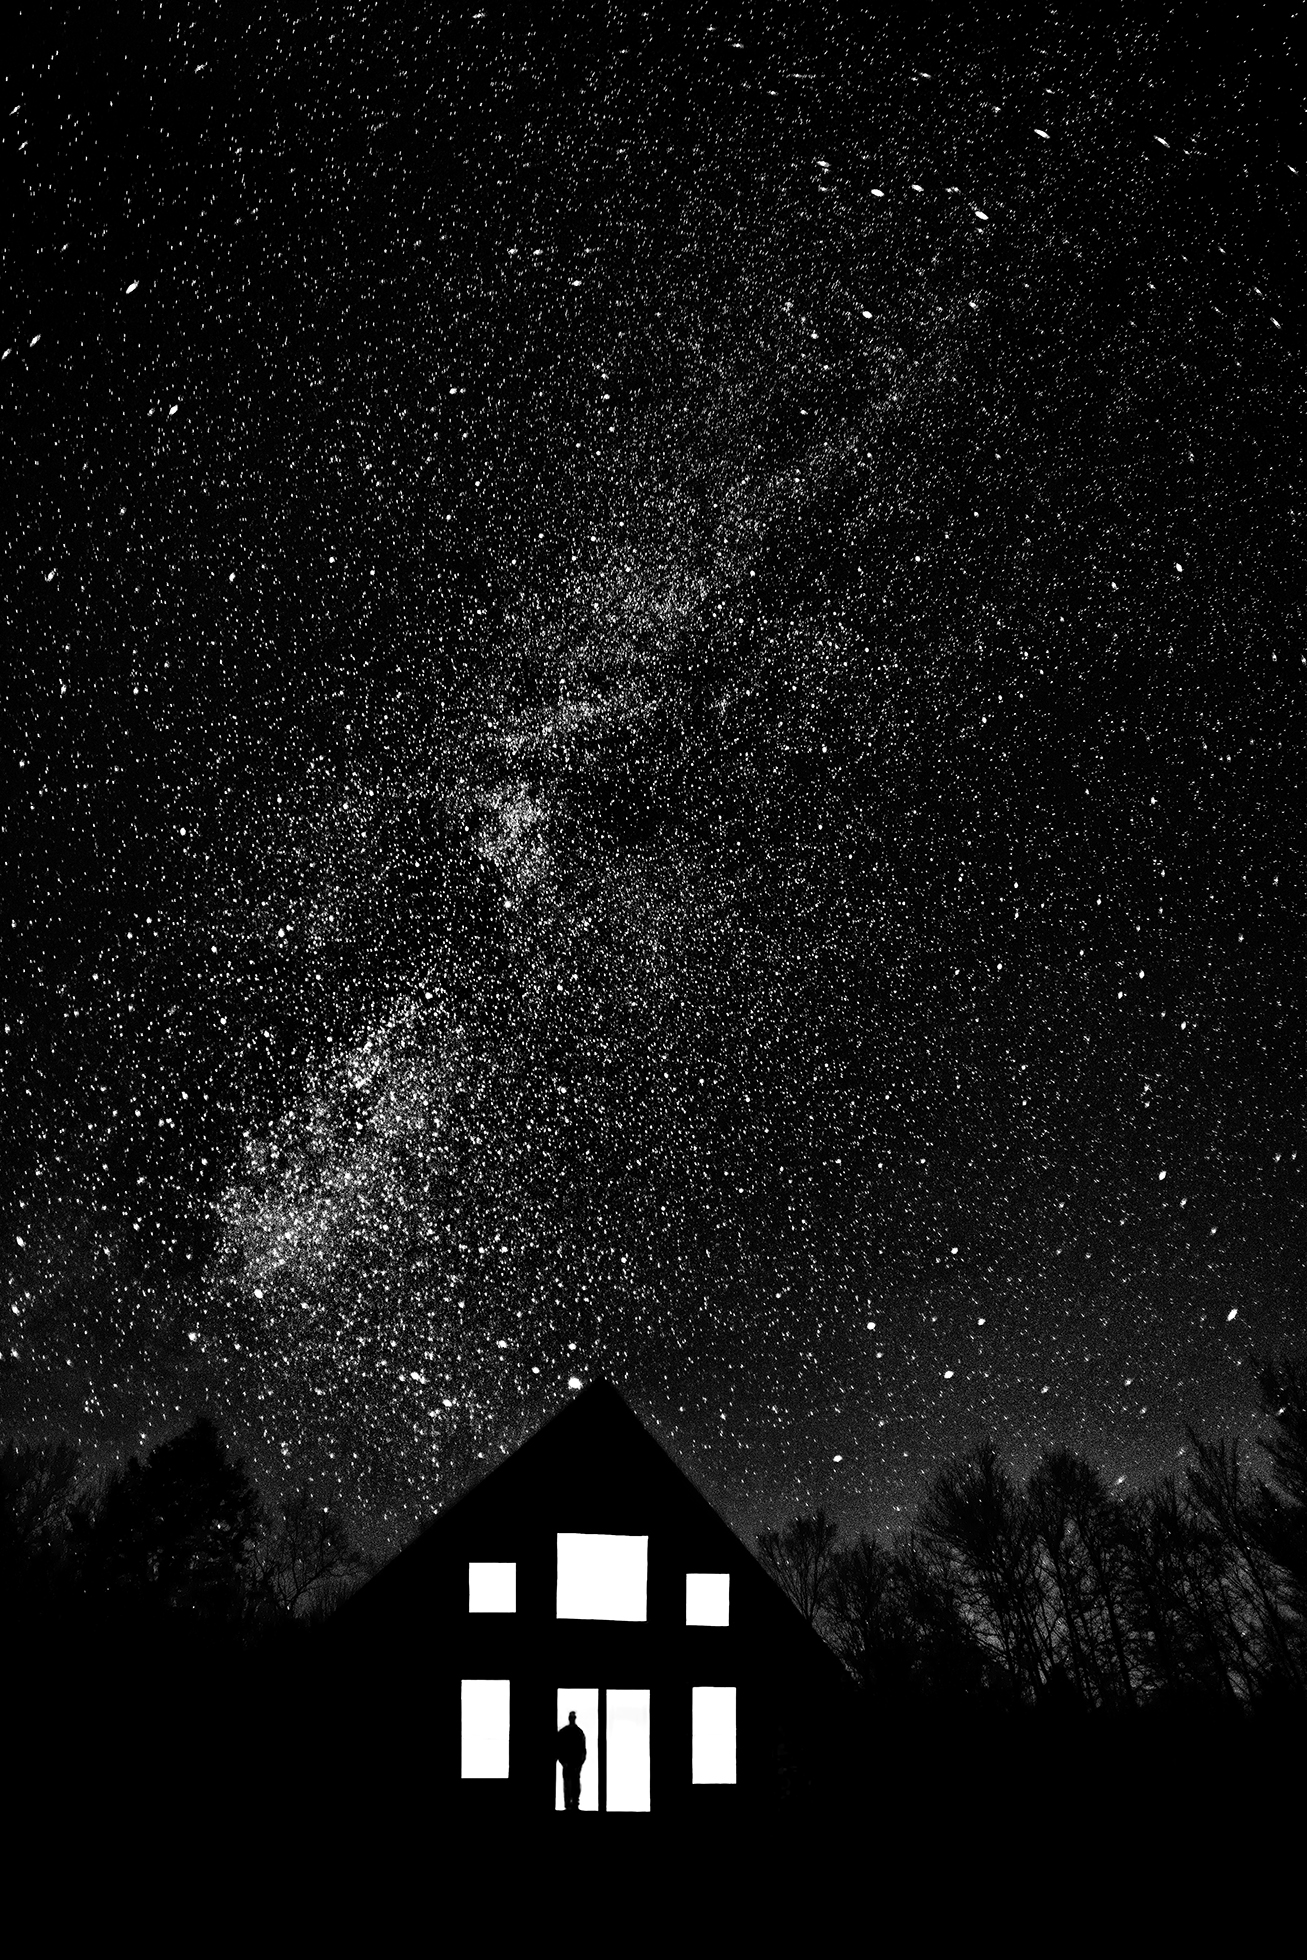 A man stands at the sliding glass door of a house in rural Pennsylvania looking out on a dark night at a sky blanketed with stars. The pitched-roof house is black against the tree line except for the illumination from the sliding door and windows.